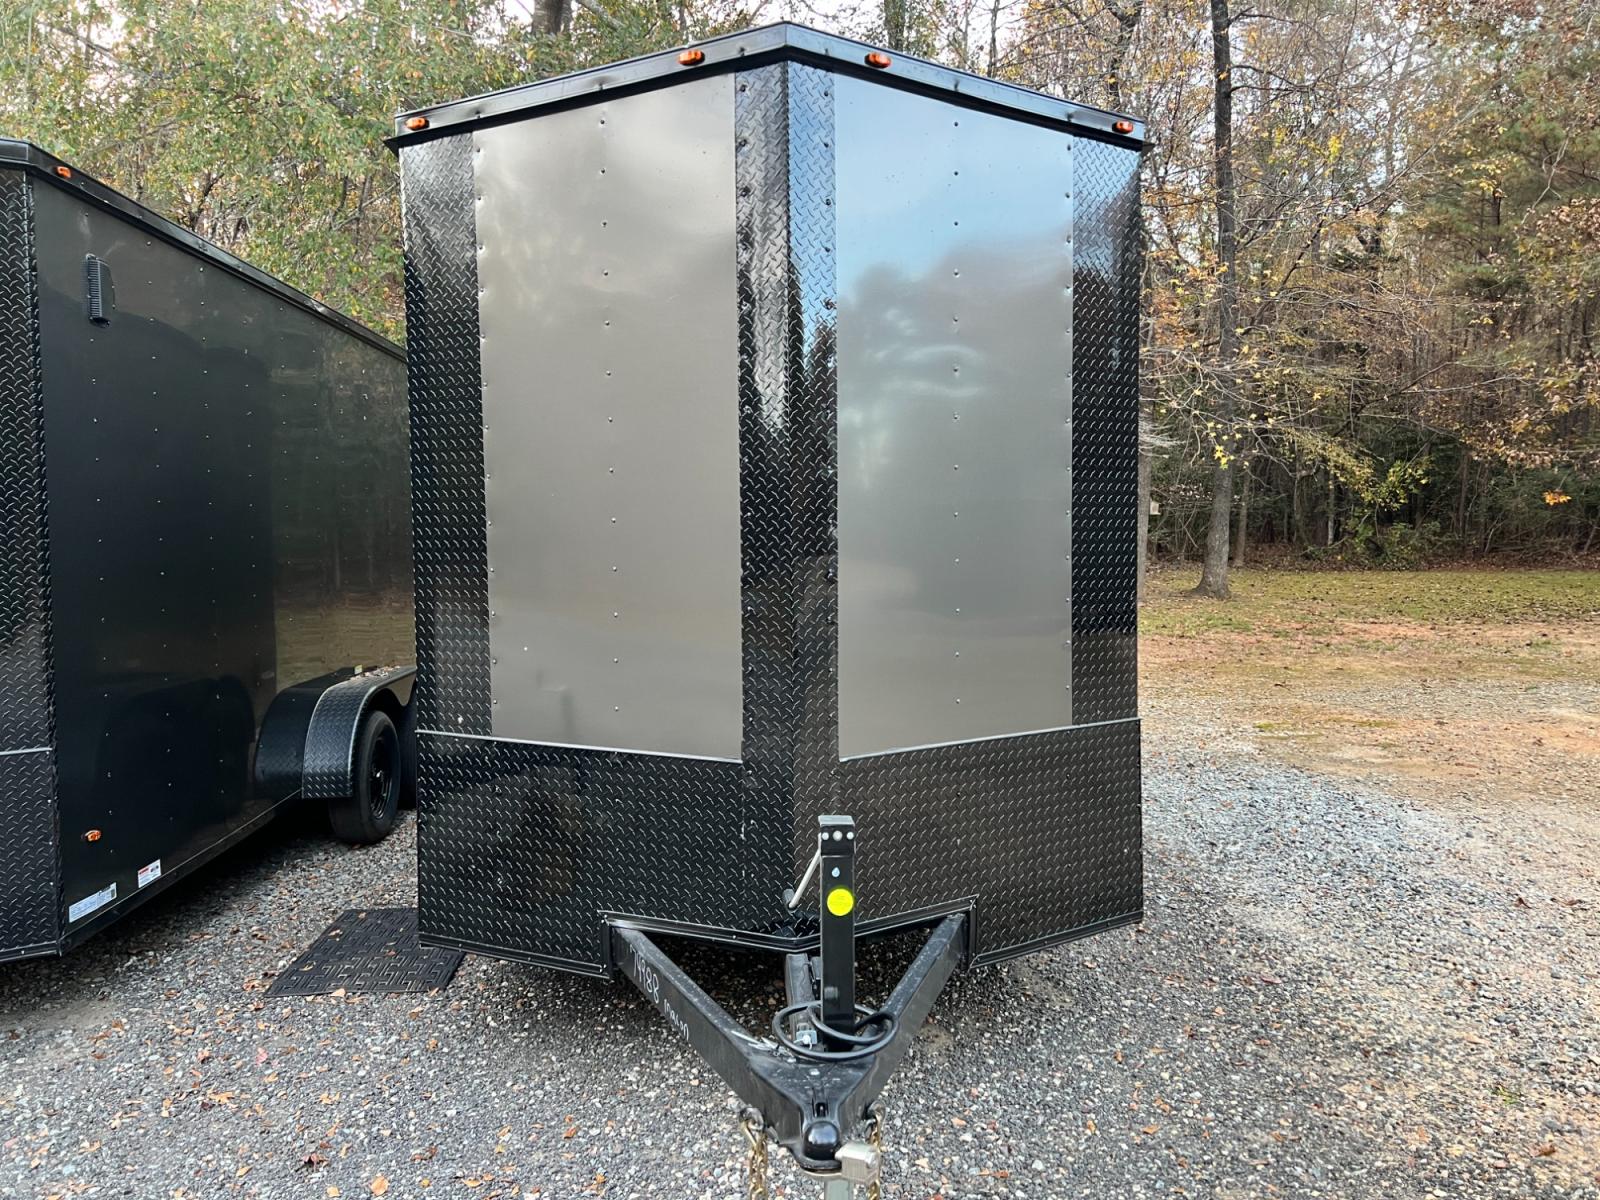 2023 .080 Charcoal Elite Cargo 7ft X 16ft Tandem 5K lb Axles! , located at 1330 Rainey Rd., Macon, 31220, (478) 960-1044, 32.845638, -83.778687 - Brand New 2023 "Top of the Line" Elite Cargo Trailer, Made in South Ga. Awesome 7ft X 16ft Tandem Enclosed Cycle Hauler & Cargo Trailer! Taller Inside Height is 7ft 6" Tall Inside & the Ramp Door Clearance is 7ft, at the Back Door! Up-Graded Larger 5k lb Dexter Brake Axles! Larger 225/75/15" 10 - Photo #5